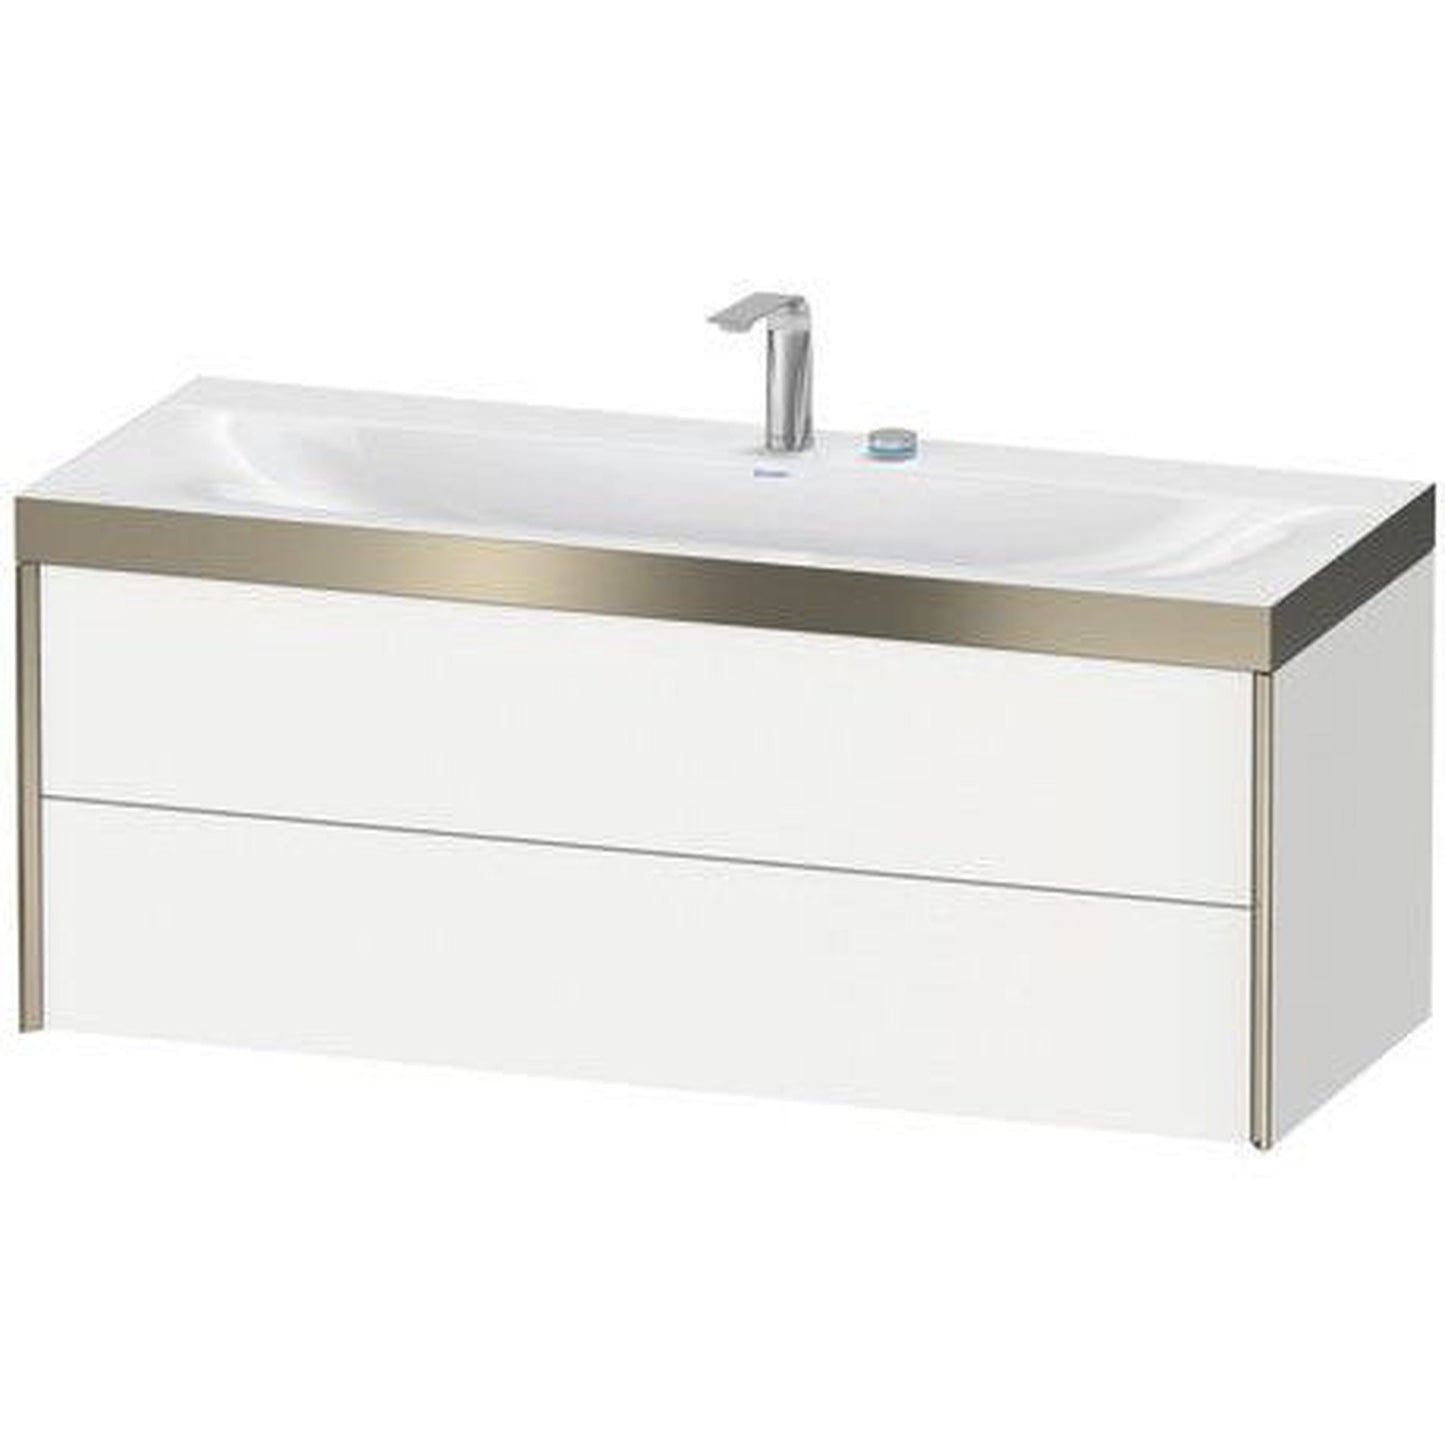 Duravit Xviu 47" x 20" x 19" Two Drawer C-Bonded Wall-Mount Vanity Kit With One Tap Hole, White (XV4617OB285P)